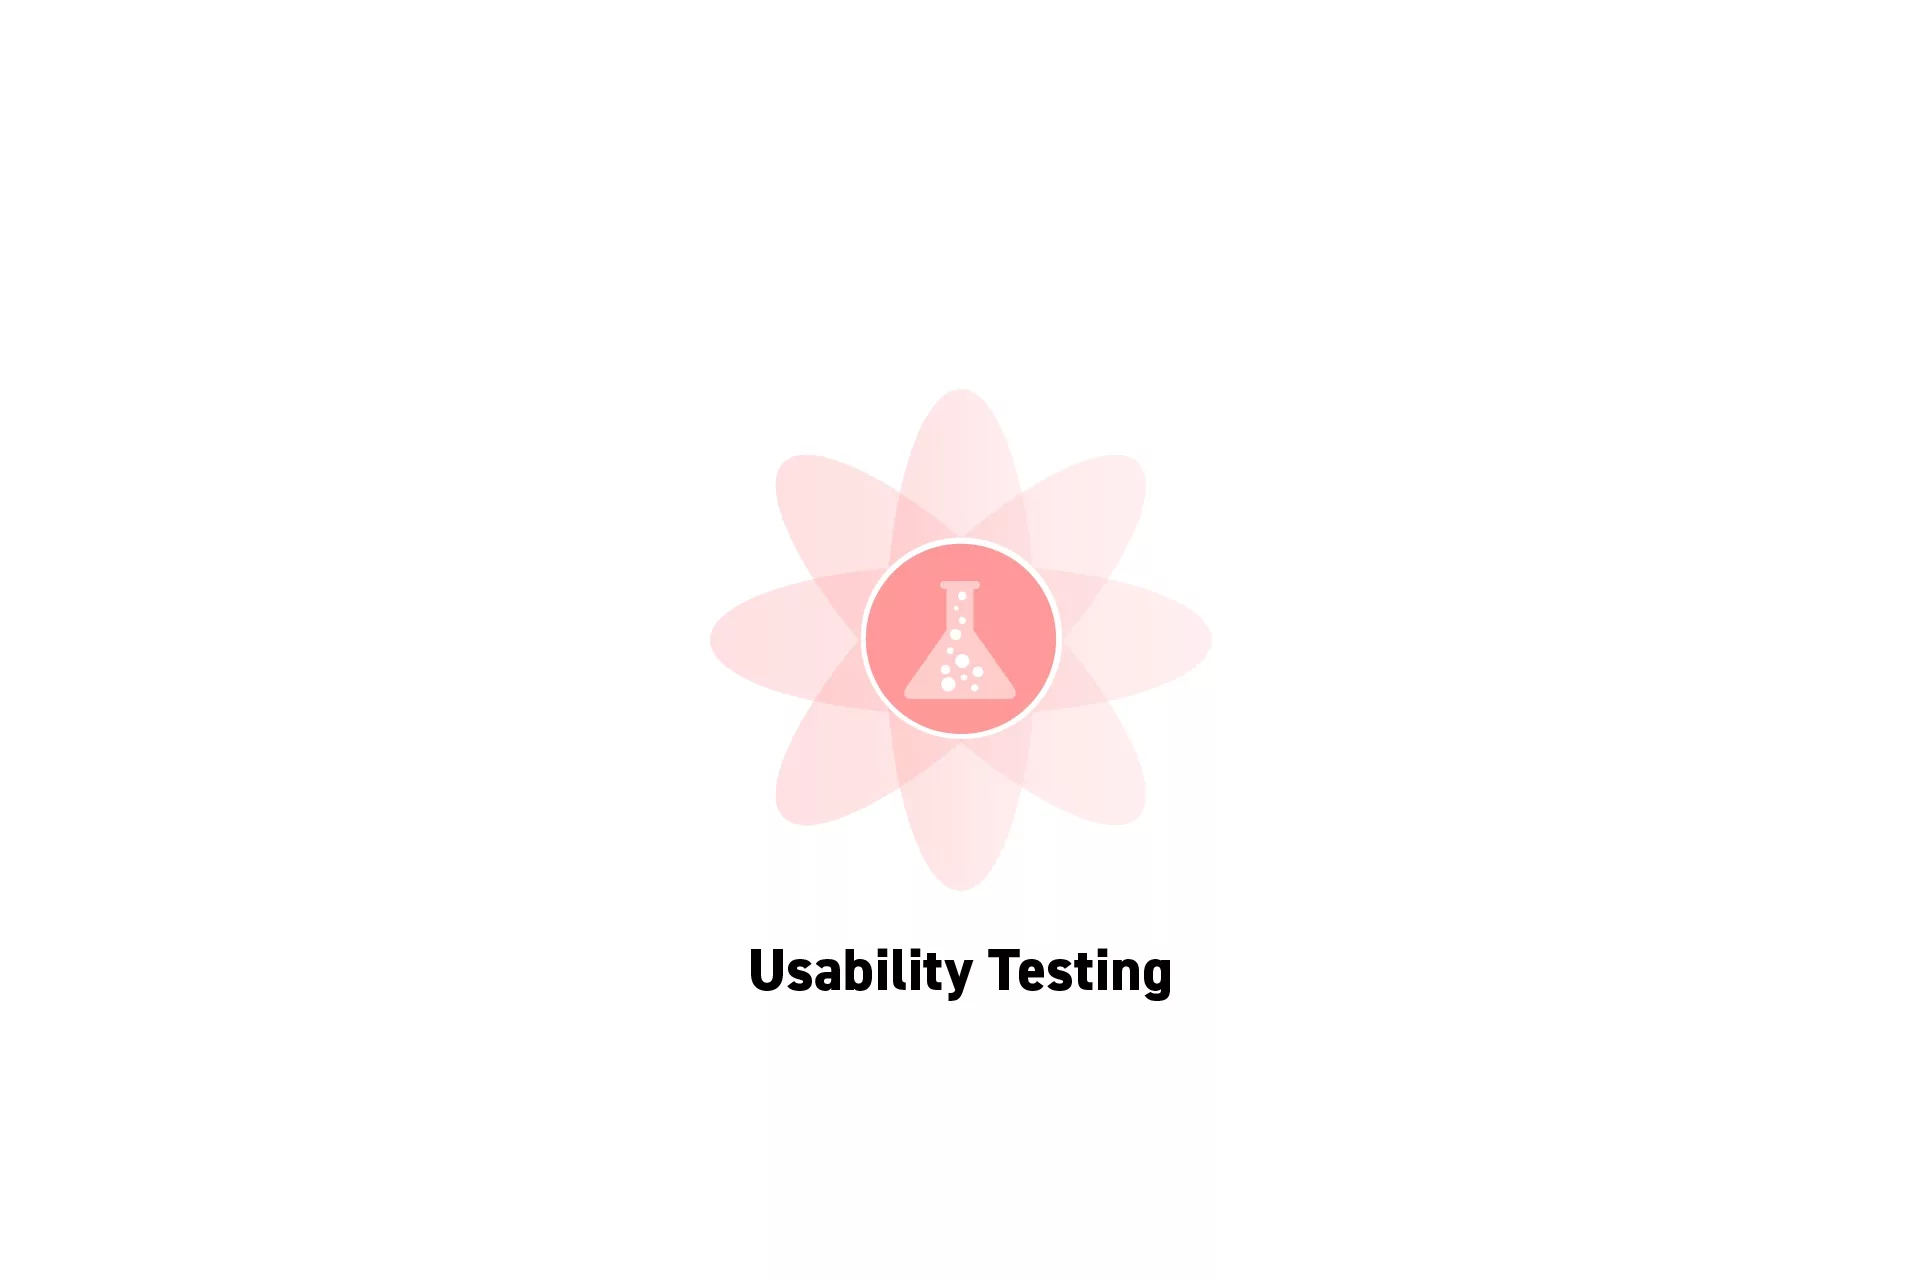 A flower that represents Strategy with the text “Usability Testing” beneath it.